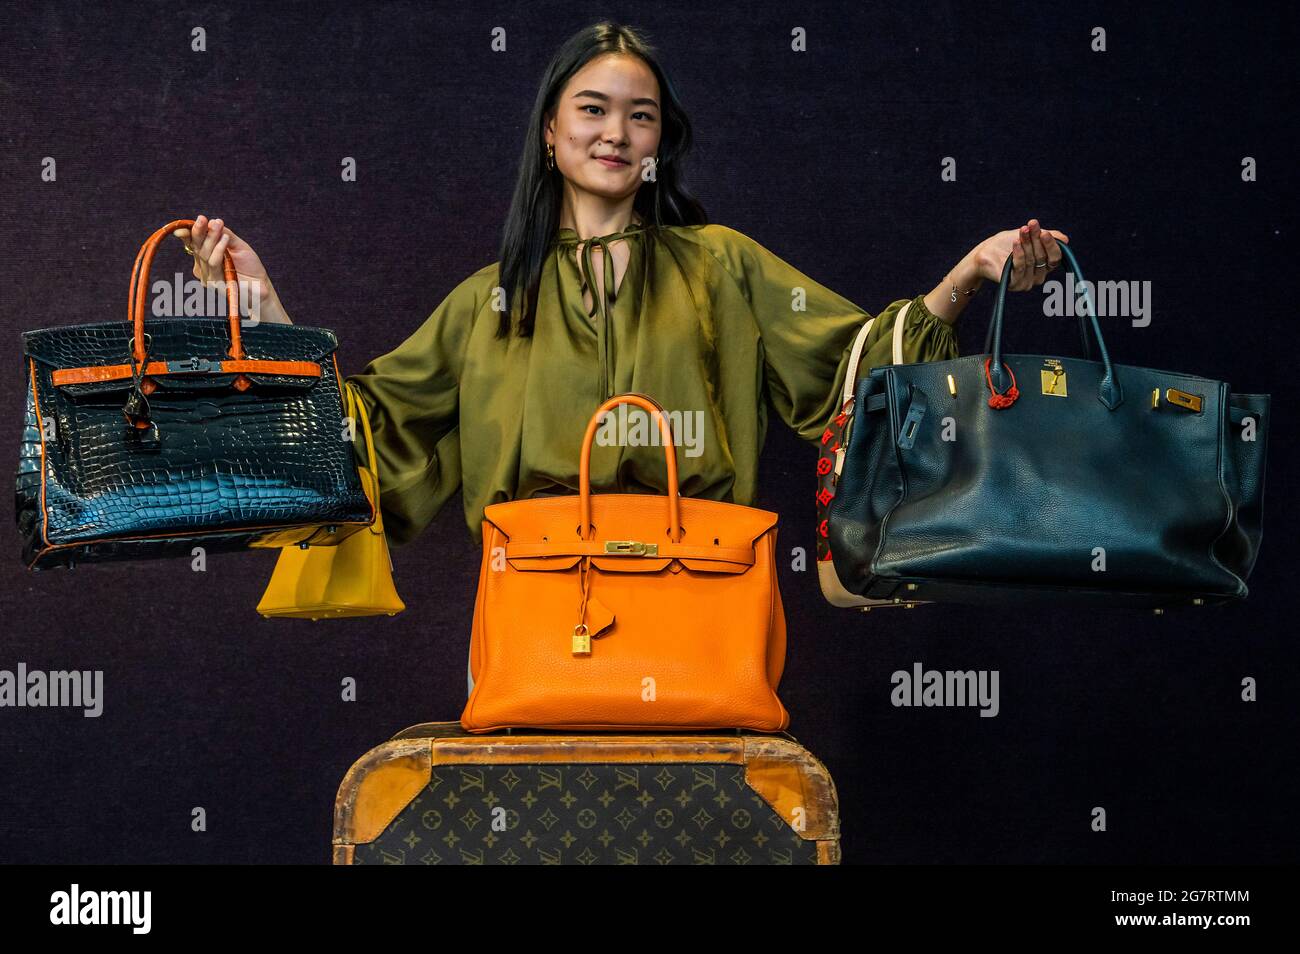 London, UK. 16th July, 2021. Black and Orange H Shiny Crocodile Birkin 35, Hermès, Limited edition 2007, est £18,000-22,000 (L) with Jane Birkin's Black Togo Birkin 35, Hermès, c. 1999, est £15-20,000 (signed by her in Tipp-Ex on the interior and held by Suzi Yang, cataloguer, R) and other bags - Preview of Bonhams' Designer Handbags and Fashion sale at their Knightsbridge site. The sale takes place on Wednesday 20 July. Credit: Guy Bell/Alamy Live News Stock Photo